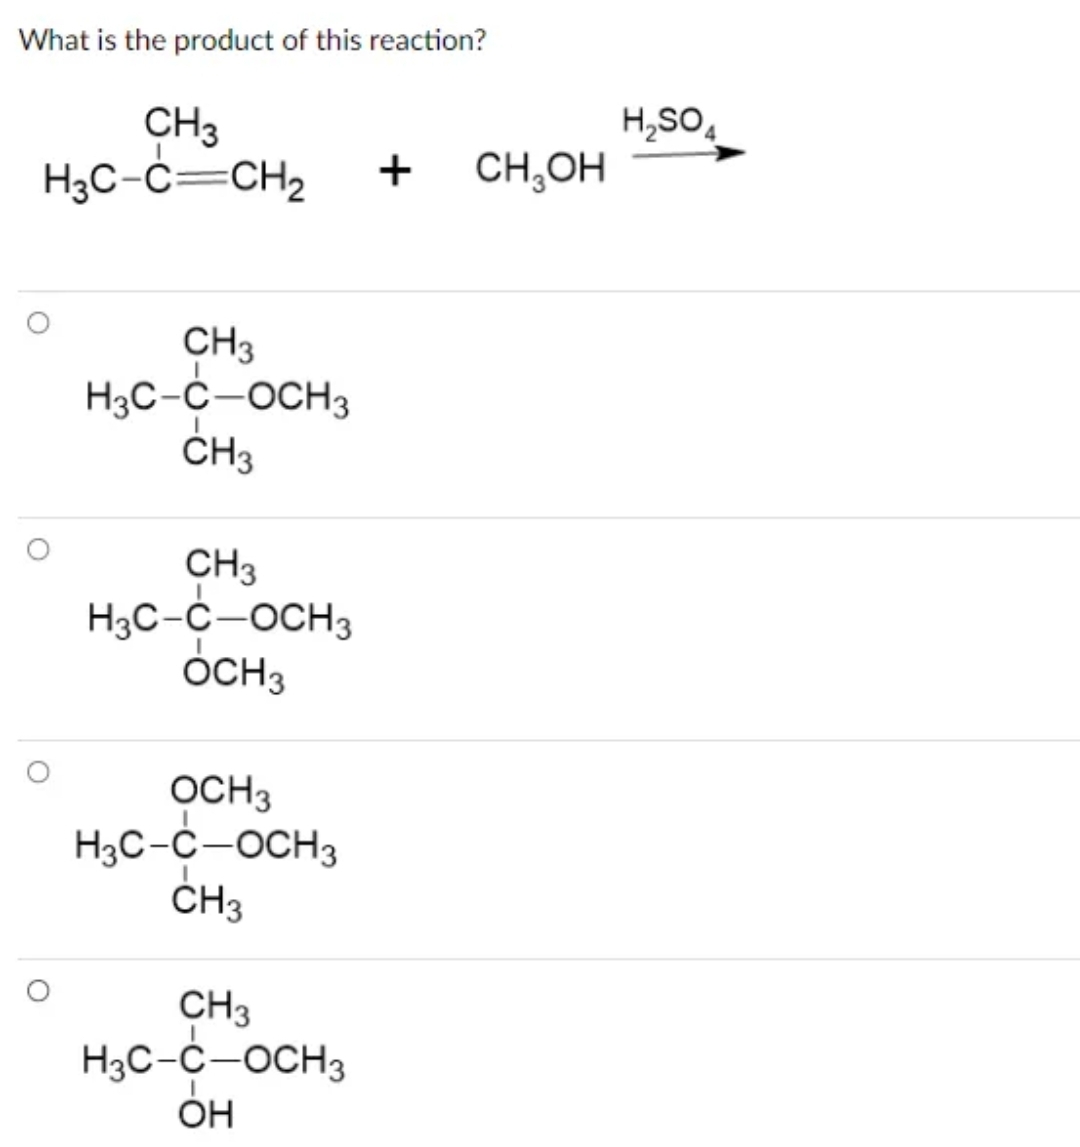 What is the product of this reaction?
CH3
H3C-C=CH₂
CH3
H3C-C-OCH3
CH3
CH3
H3C-C-OCH3
OCH3
OCH3
H3C-C-OCH3
CH3
CH3
H3C-C-OCH3
ОН
+ CH3OH
H₂SO4